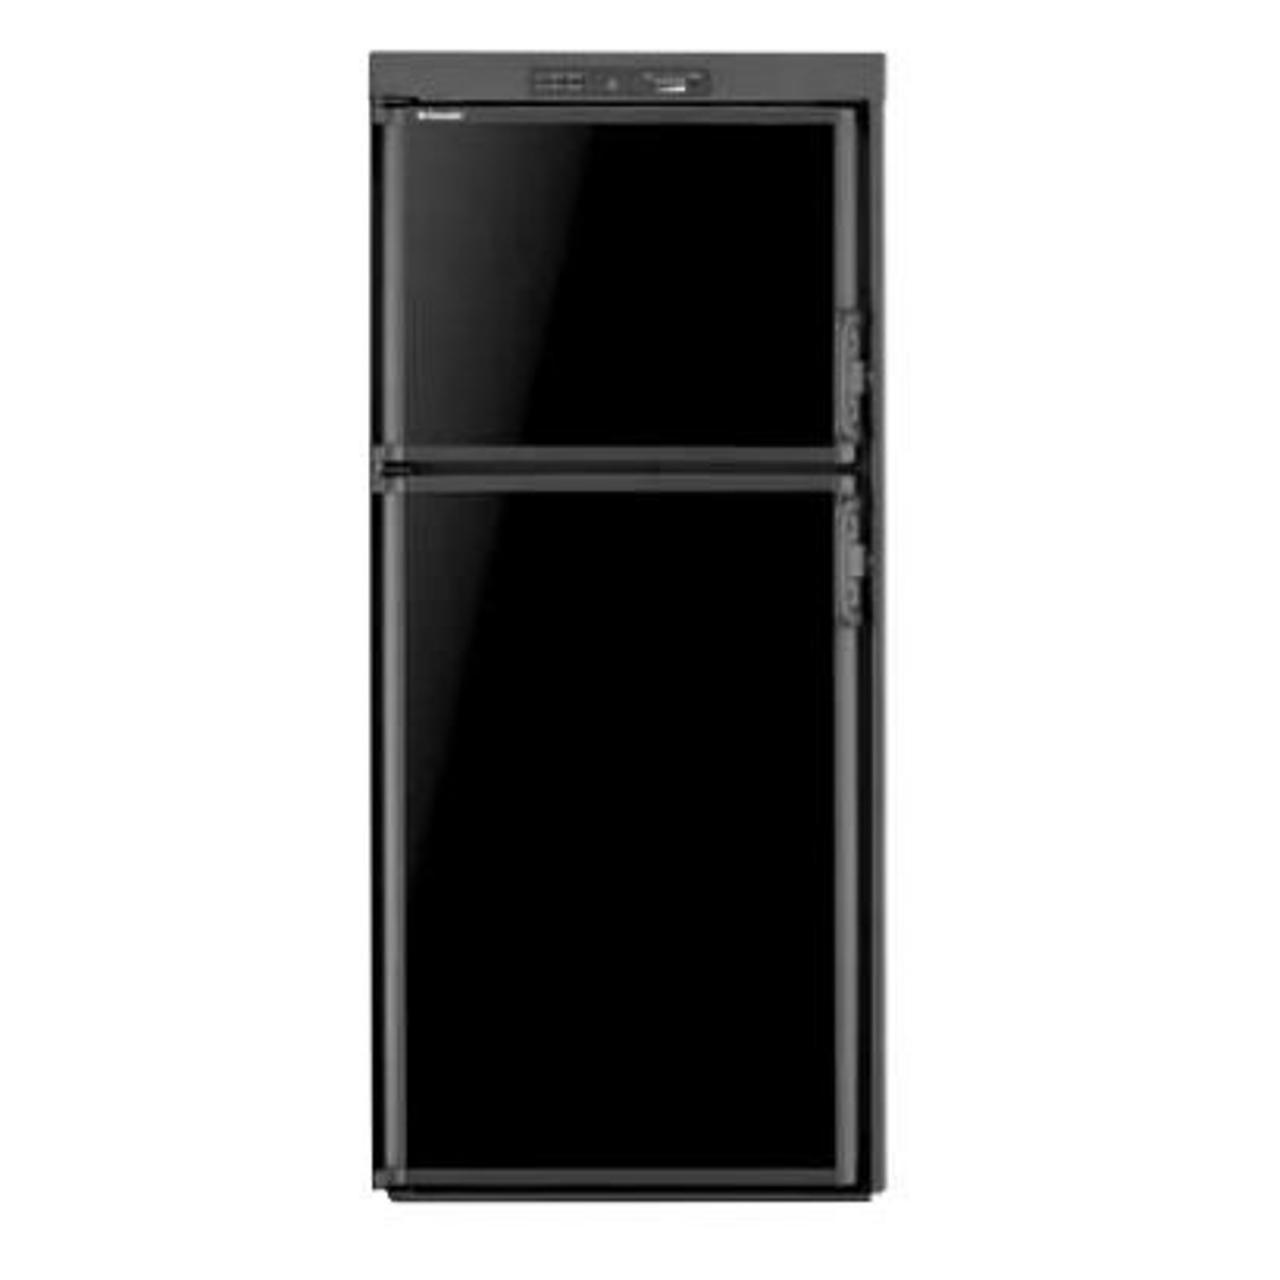 Color - Black Frame, Depth (IN) - 24-7/8 Inch, Height (IN) - 54-9/16 Inch,  Power Source - 2-Way LP Gas Operation, Temperature Control - Automatic,  Type - Double Compartment Refrigerator With 3-Position